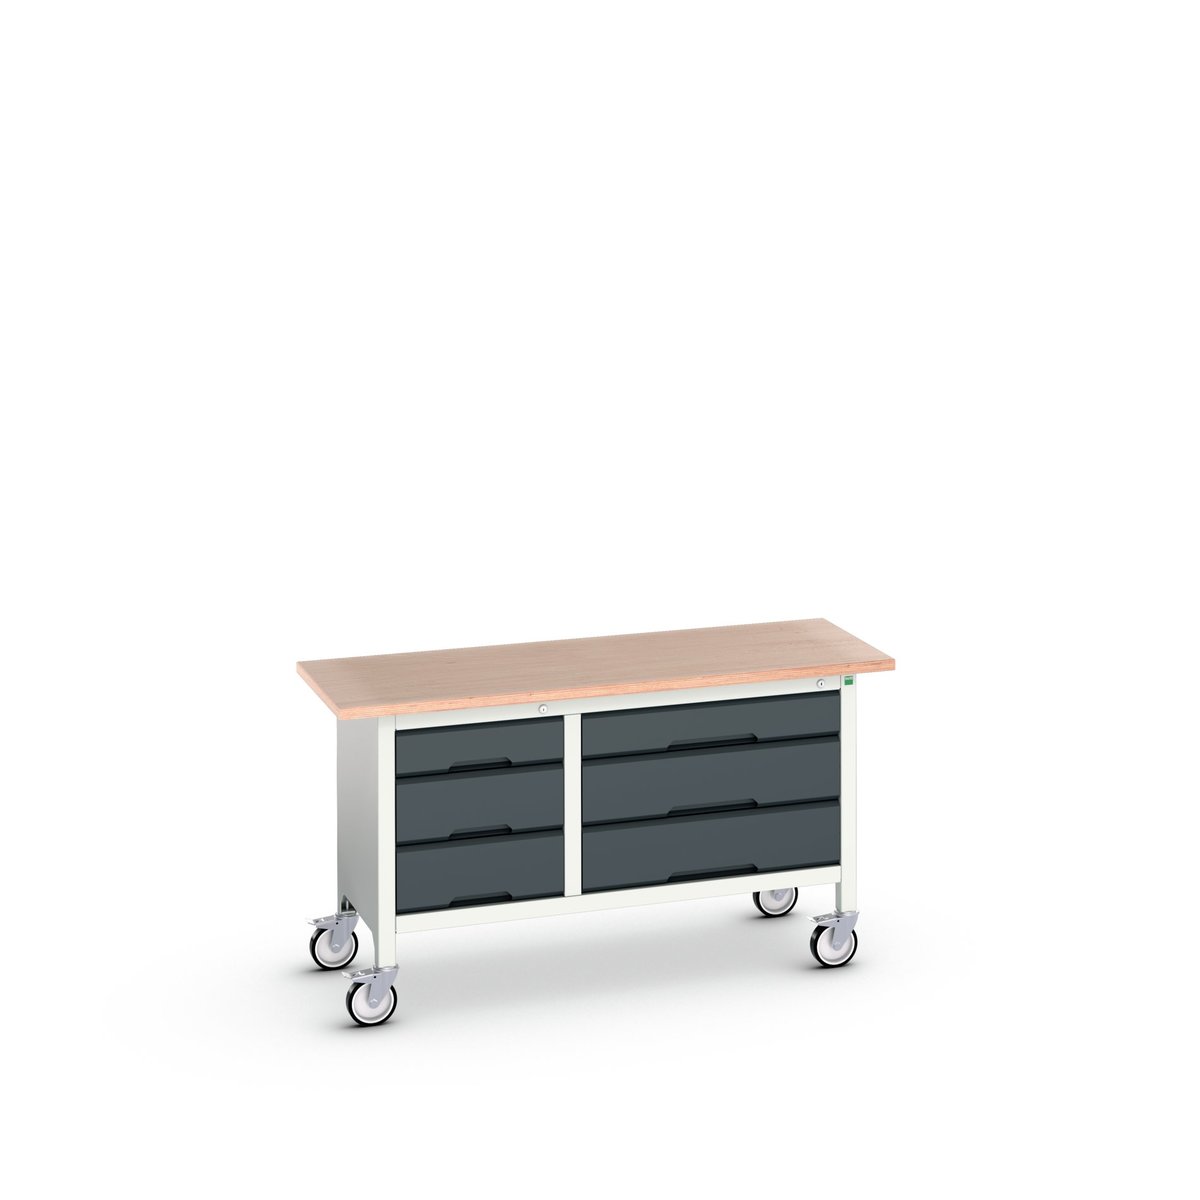 16923215. - verso mobile storage bench (mpx)